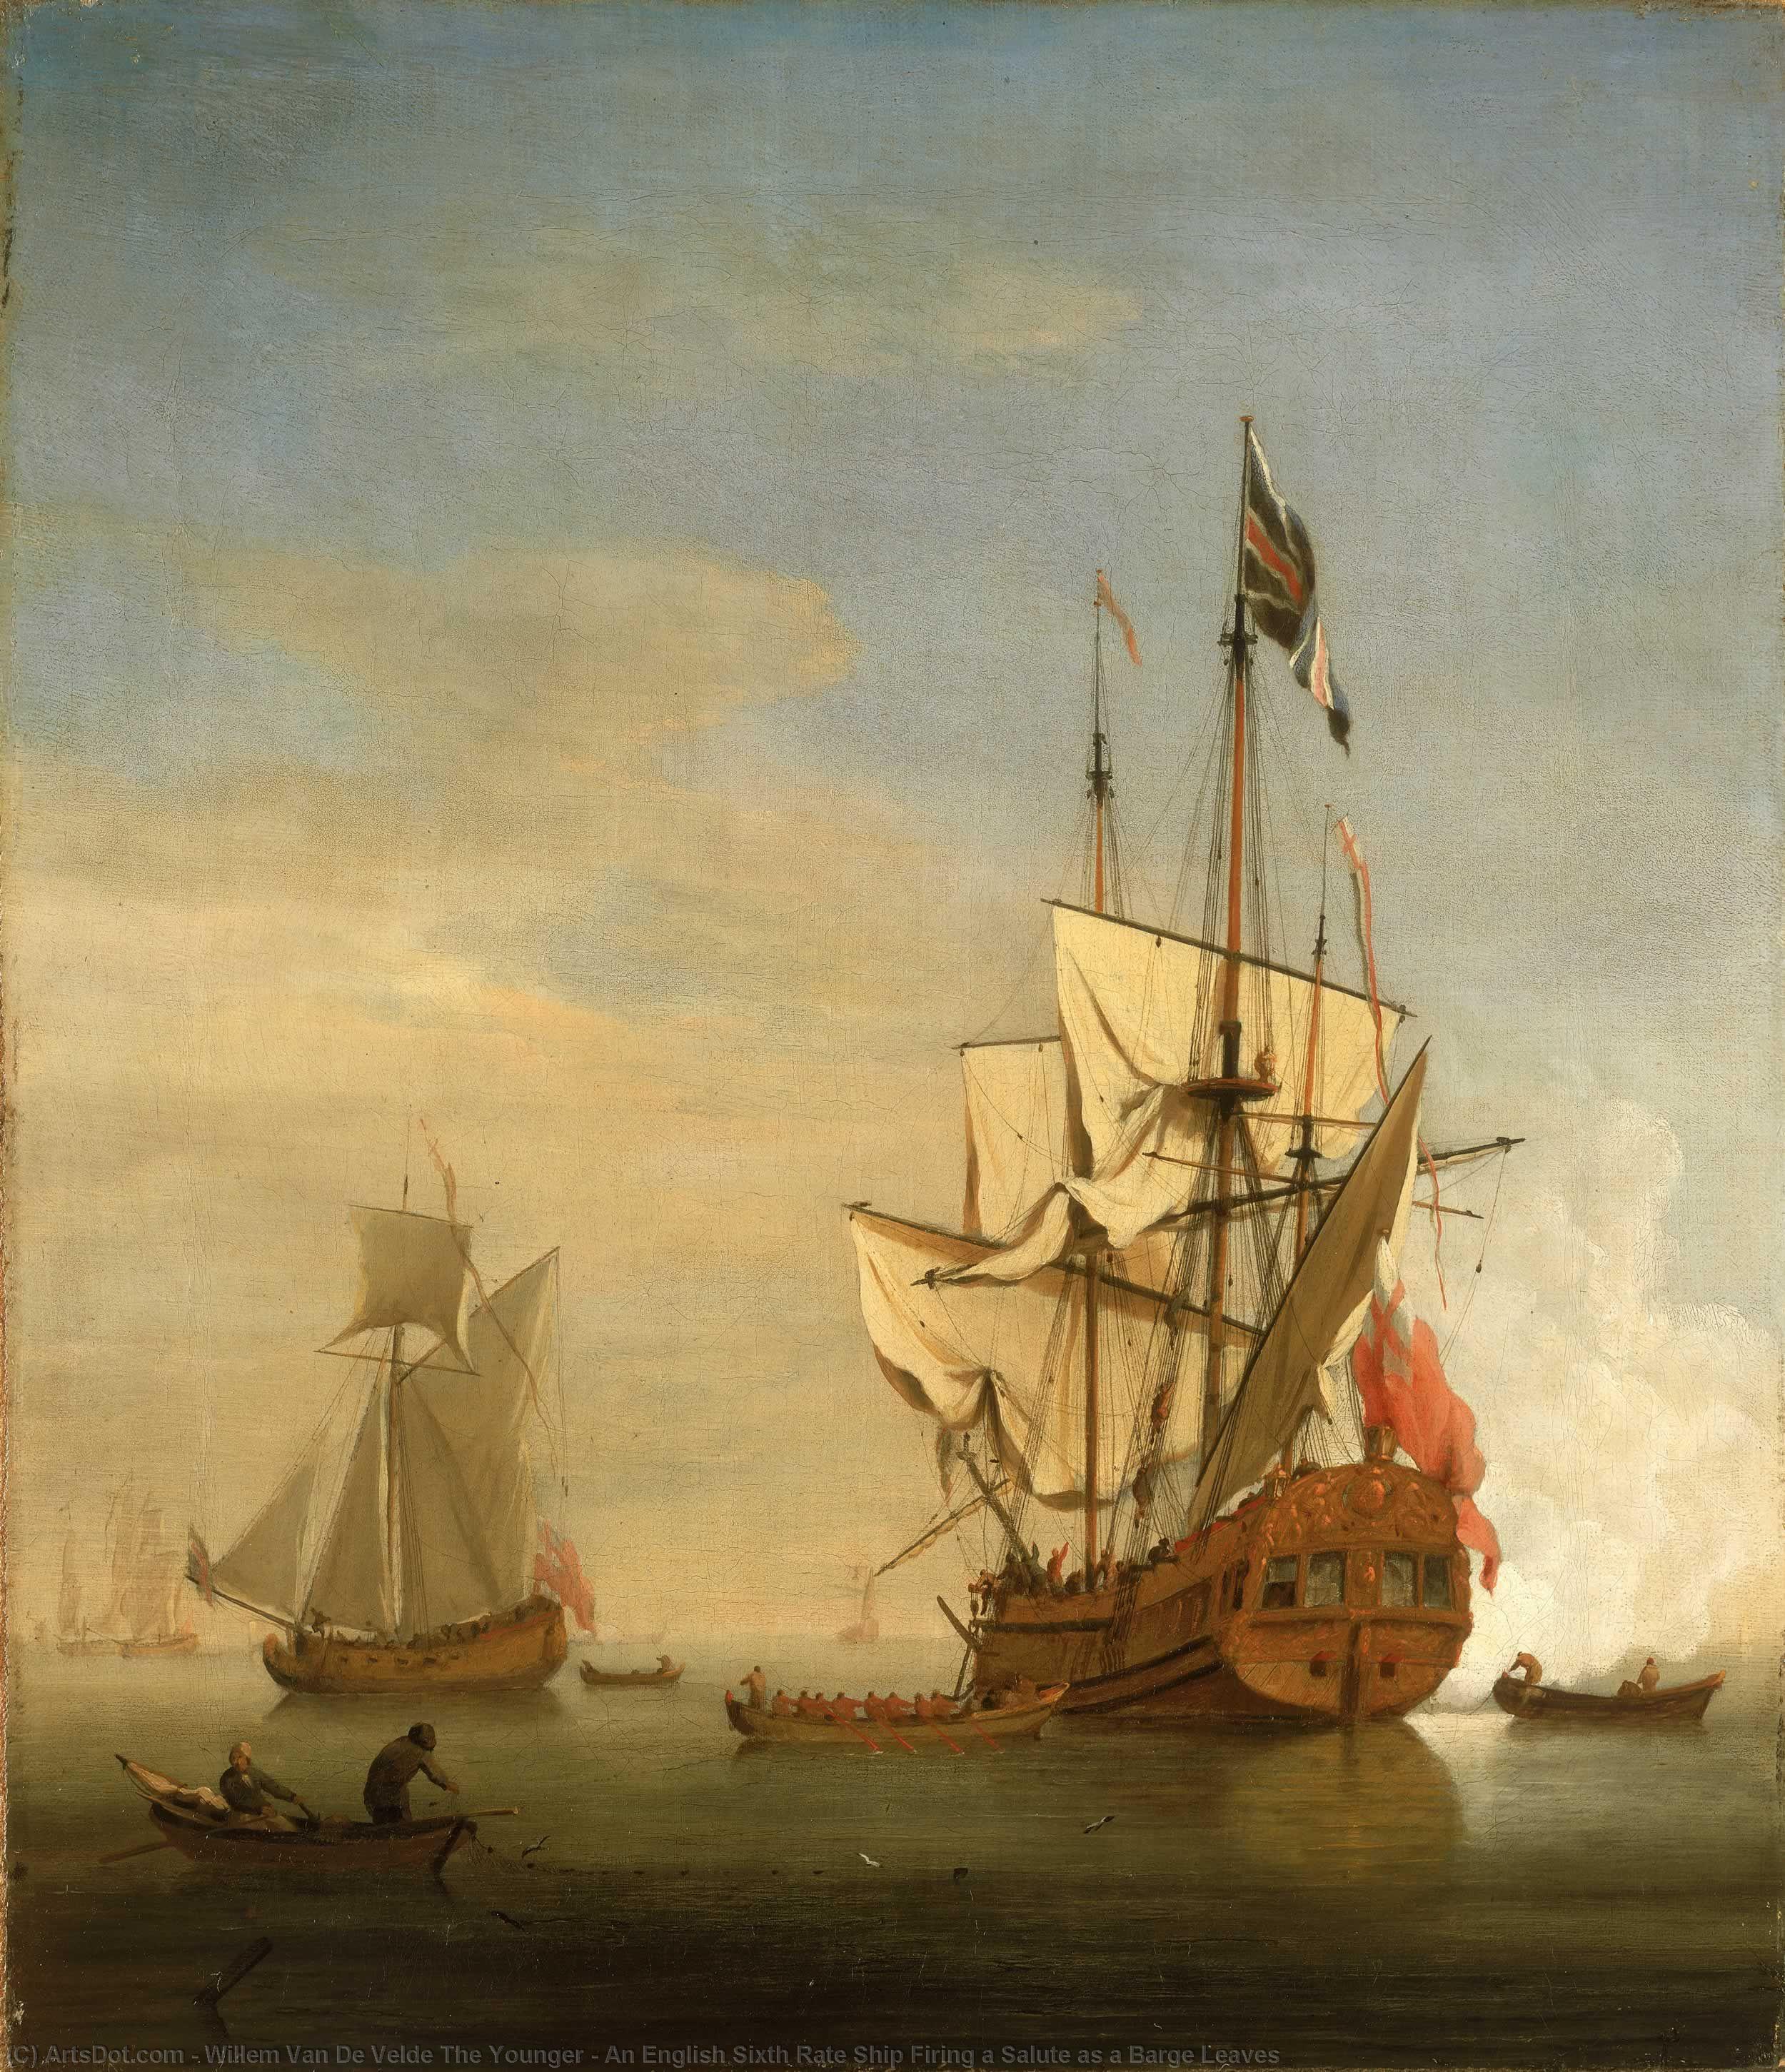 Buy Museum Art Reproductions An English Sixth Rate Ship Firing a Salute as a Barge Leaves, 1706 by Willem Van De Velde The Younger | ArtsDot.com